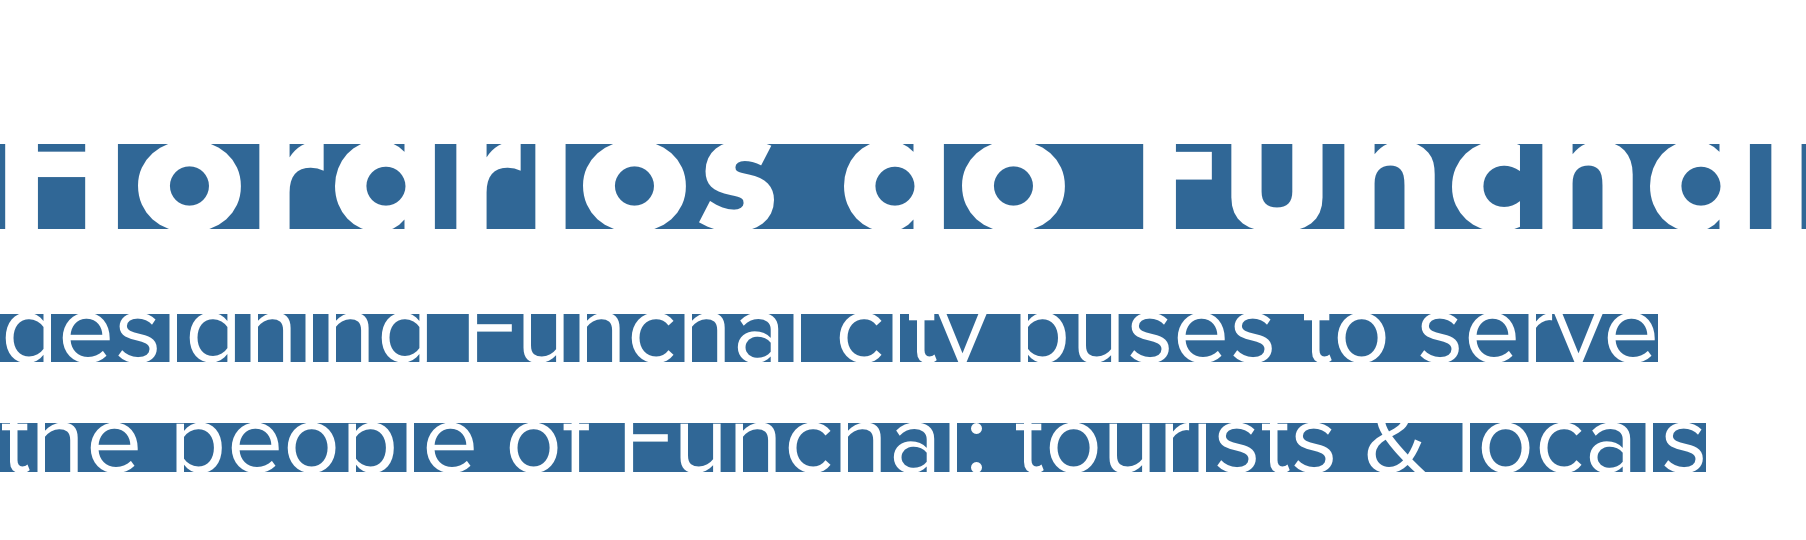 Horarios do Funchal - designing Funchal city buses to serve the people of Funchal: tourists & locals